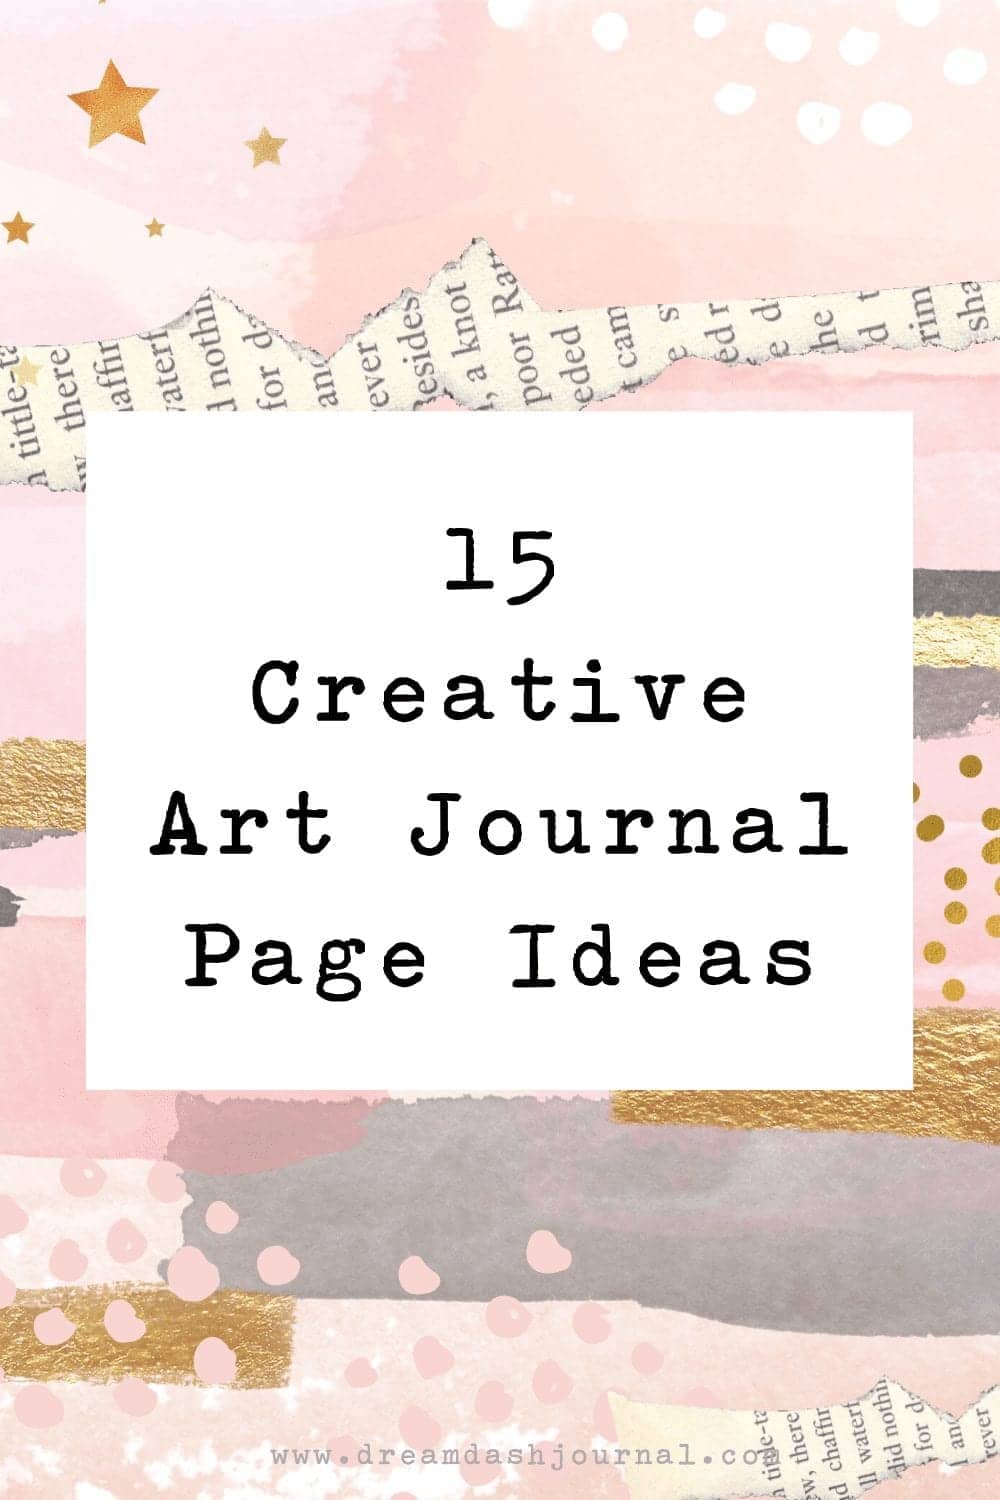 Creative art journal pages